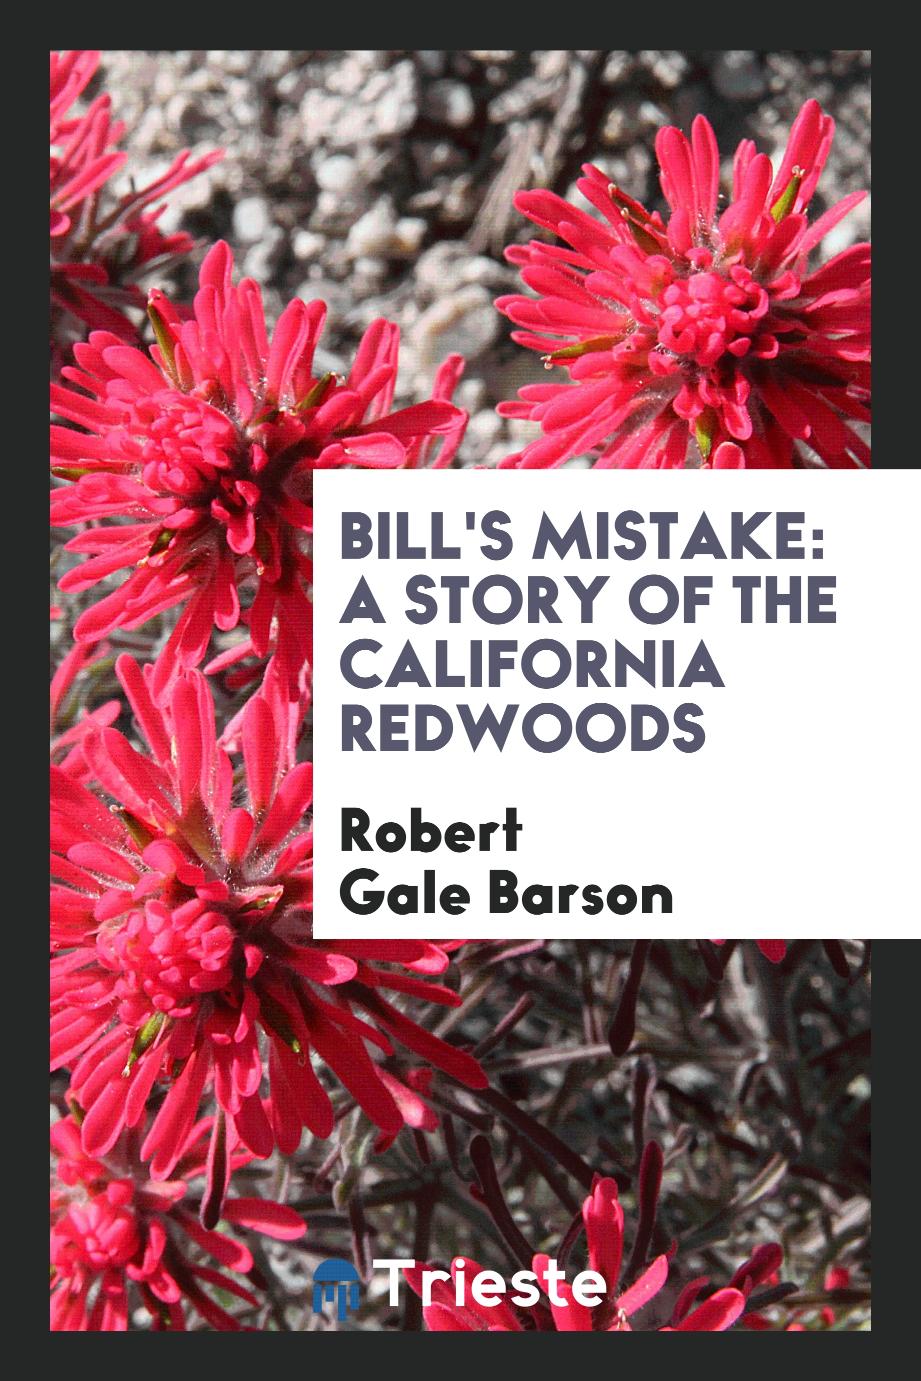 Bill's mistake: a story of the California redwoods